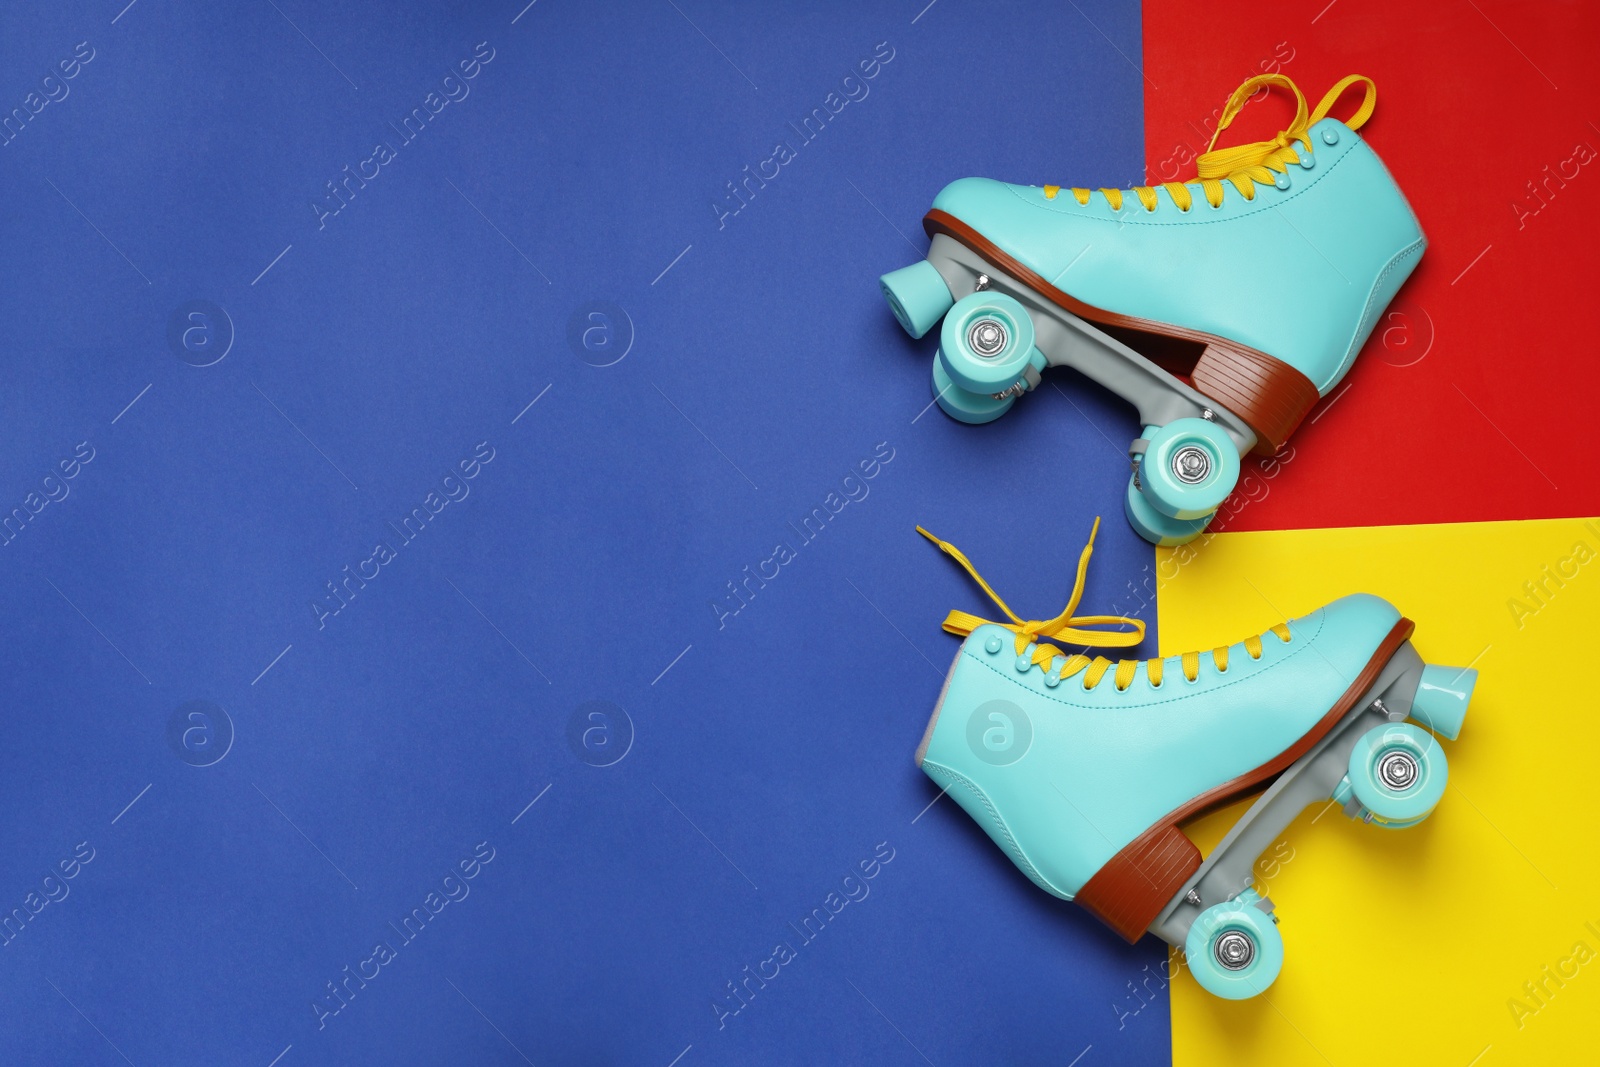 Photo of Pair of stylish quad roller skates on color background, top view with space for text